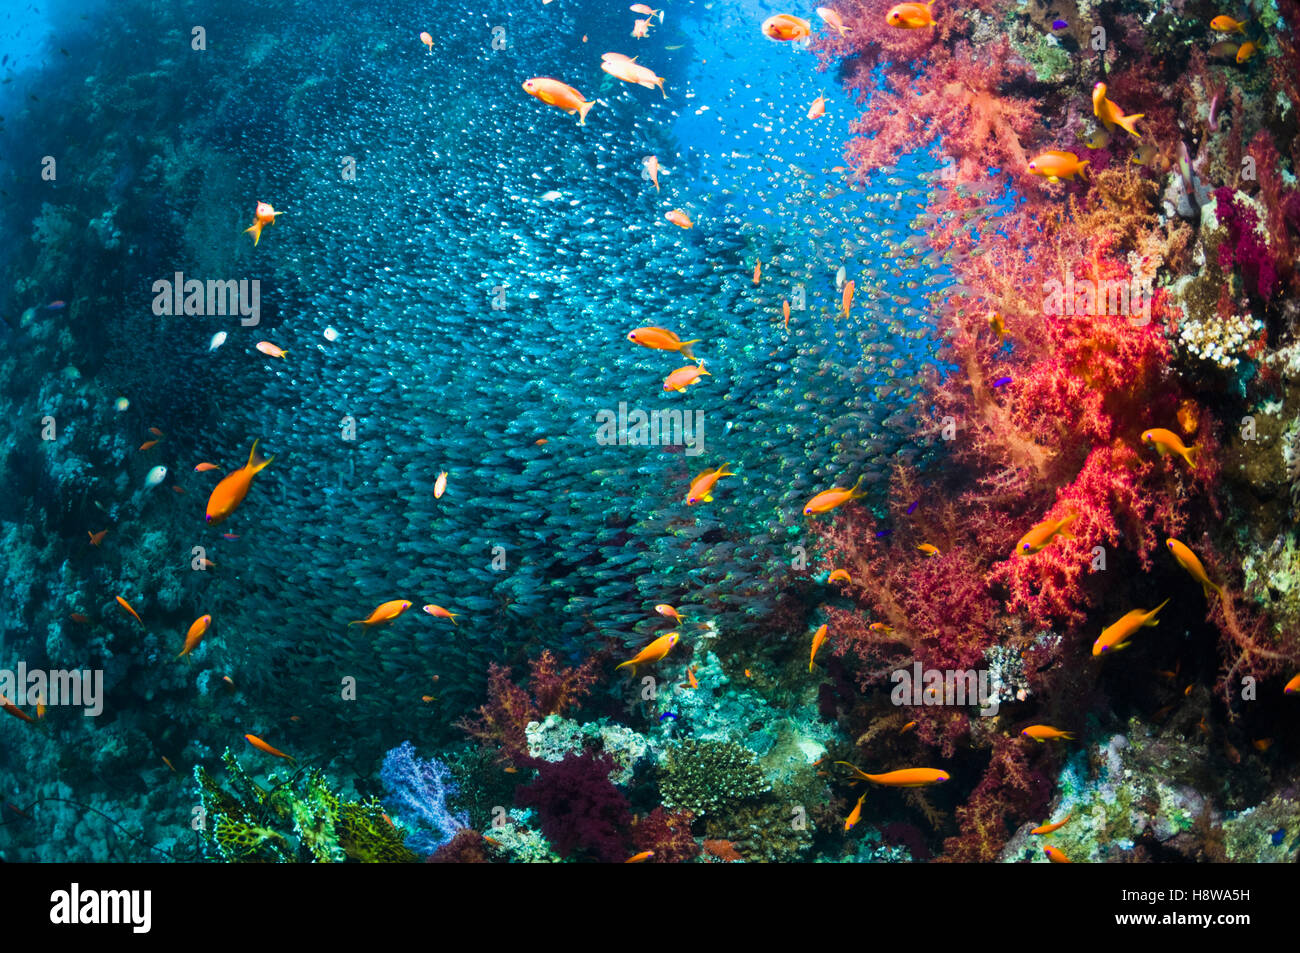 Coral reef scenery with soft corals (Dendronephthya sp) and Pygmy sweepers (Parapriacanthus guentheri).  Egypt, Red Sea. Stock Photo